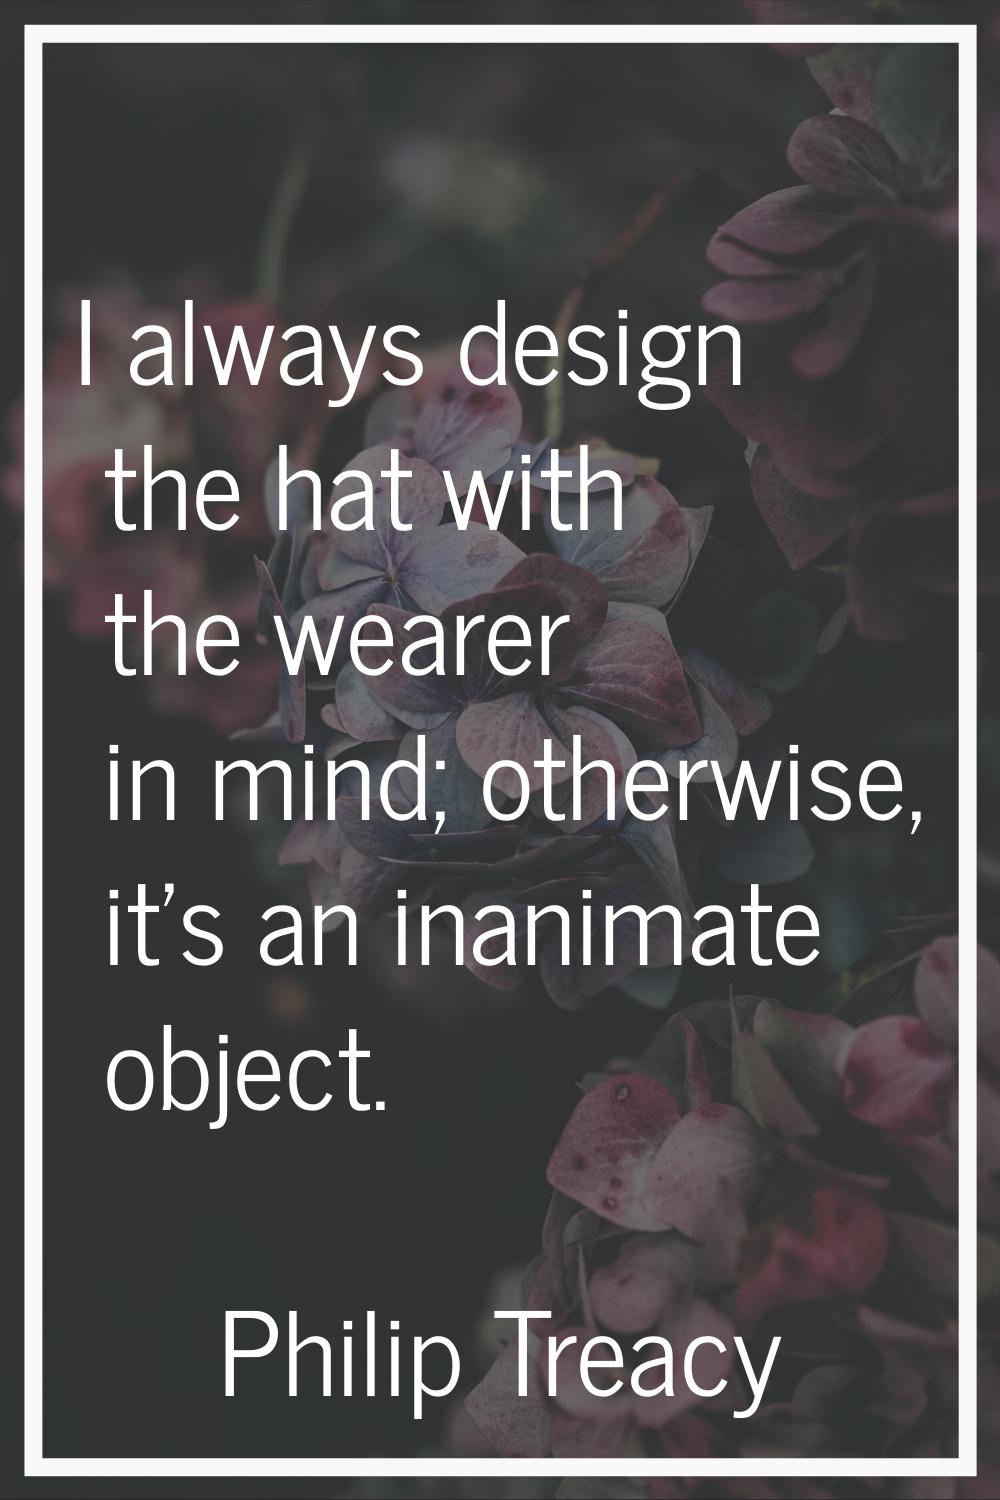 I always design the hat with the wearer in mind; otherwise, it's an inanimate object.